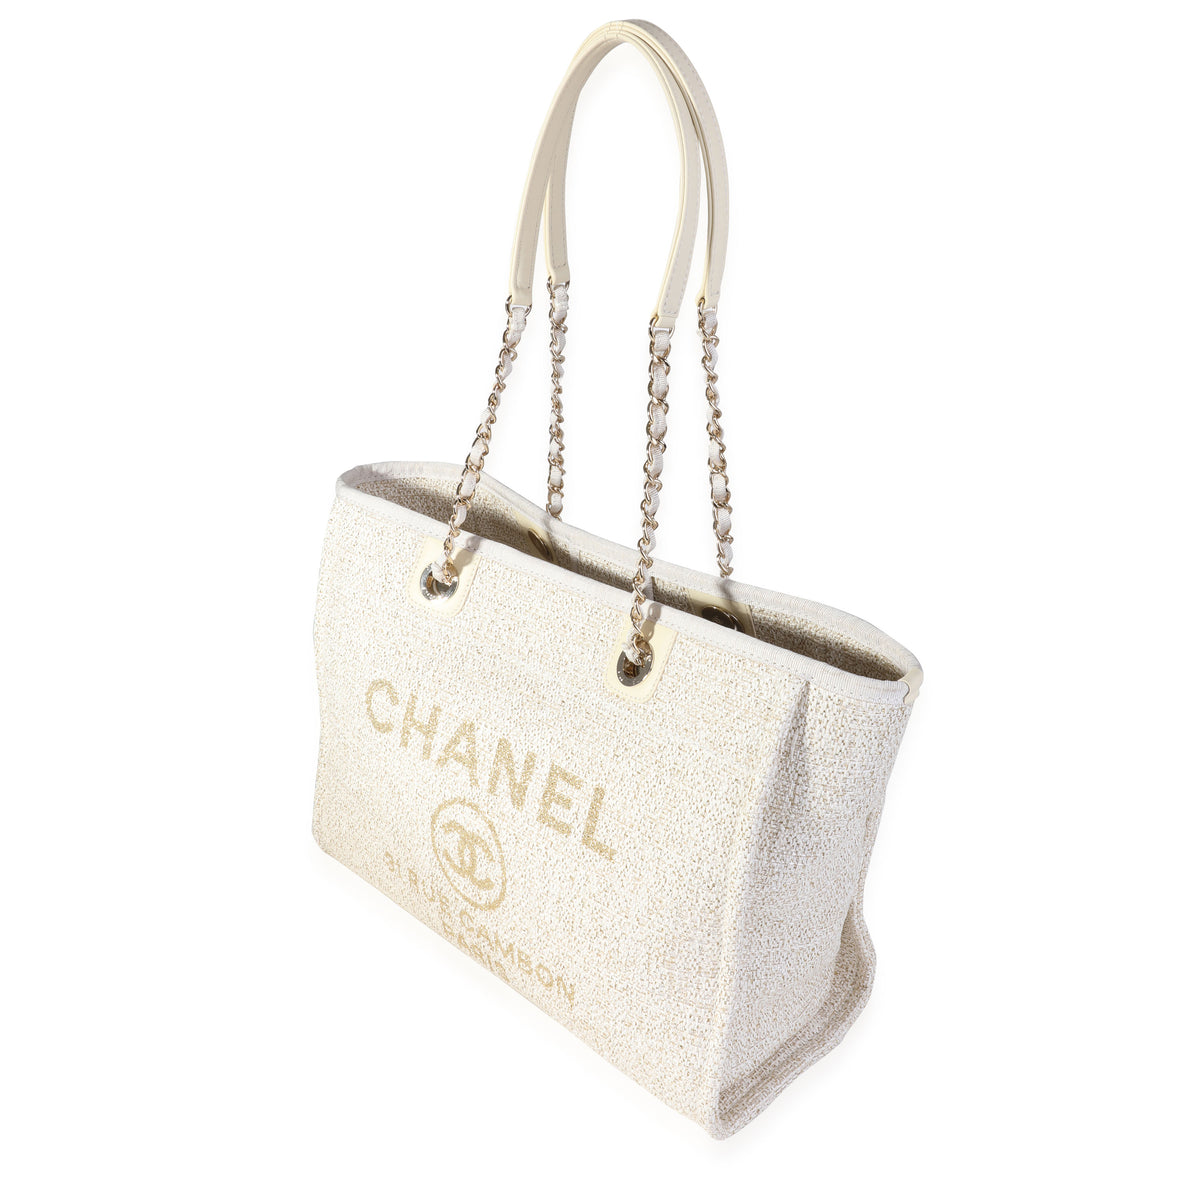 Chanel Ivory Metallic Tweed Small Deauville Shopping Tote